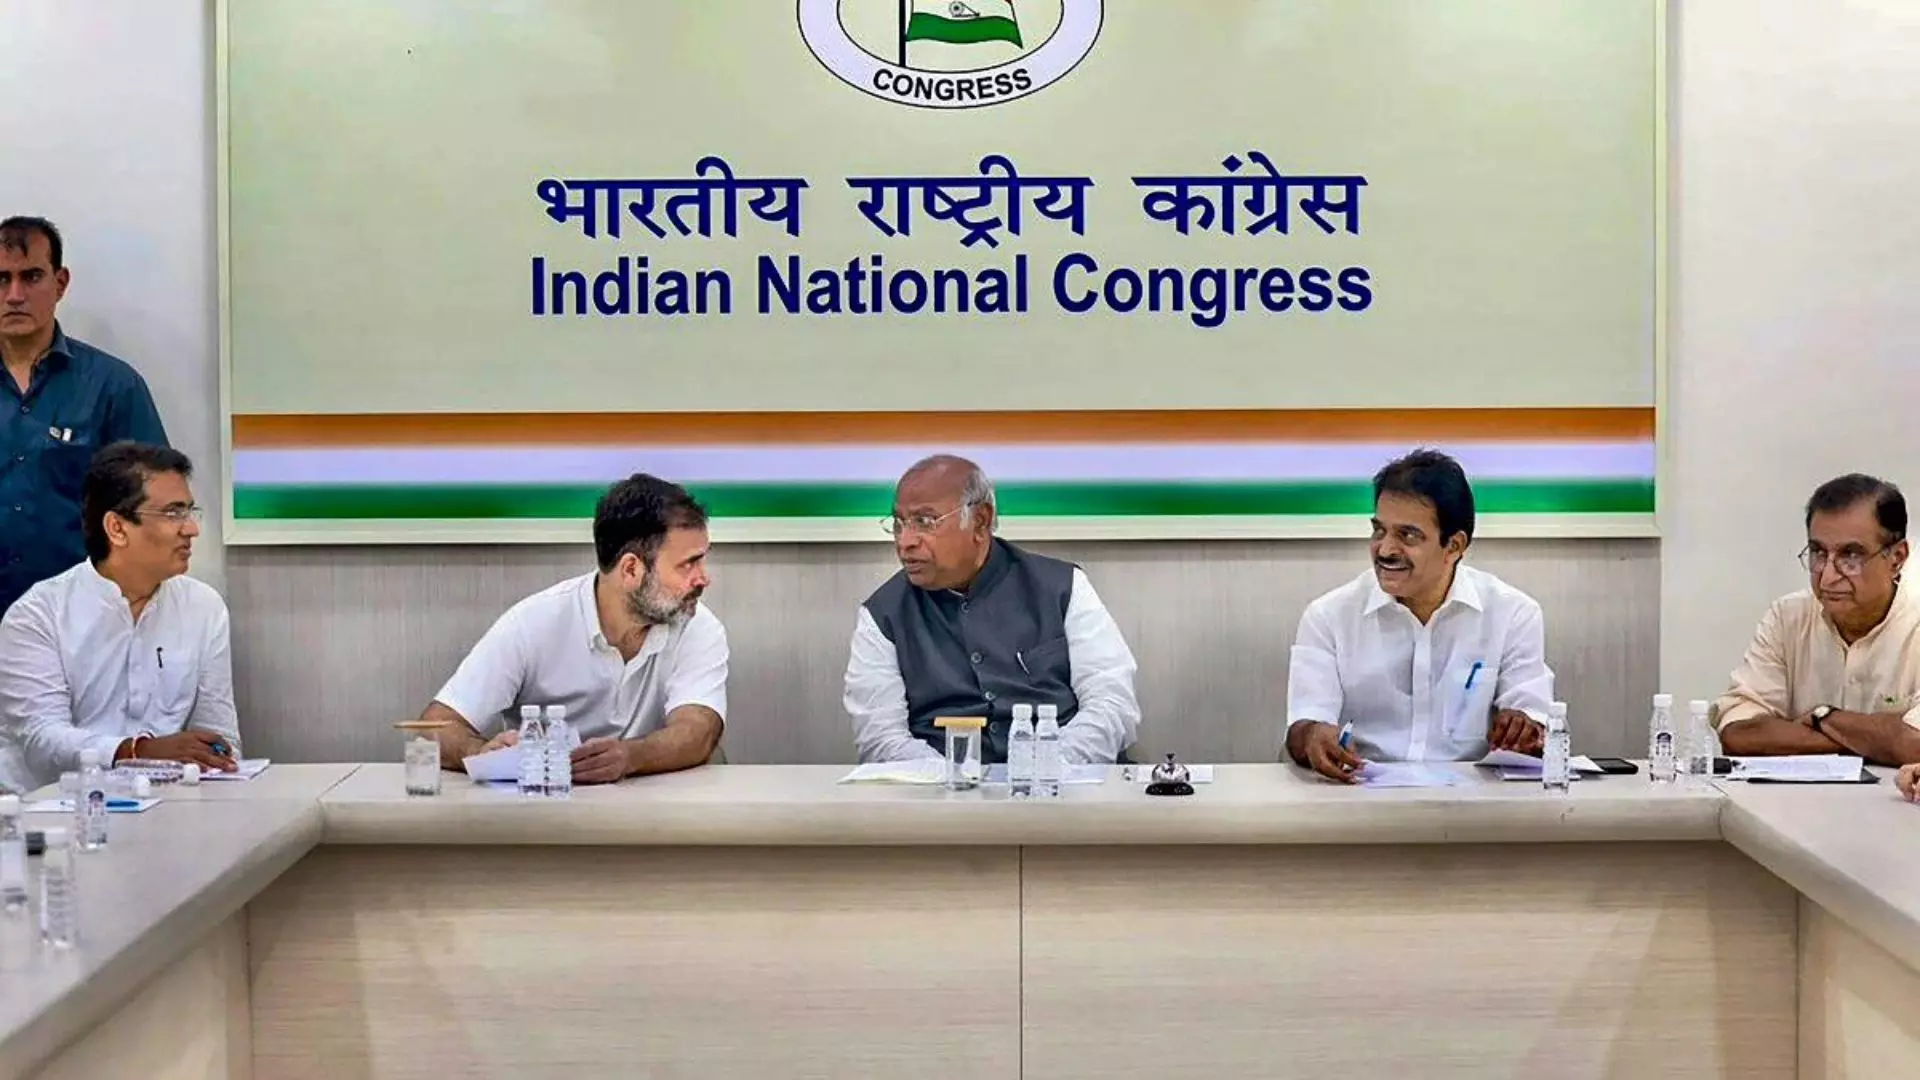 Congress claims free and open discussions to take place in CWC meeting